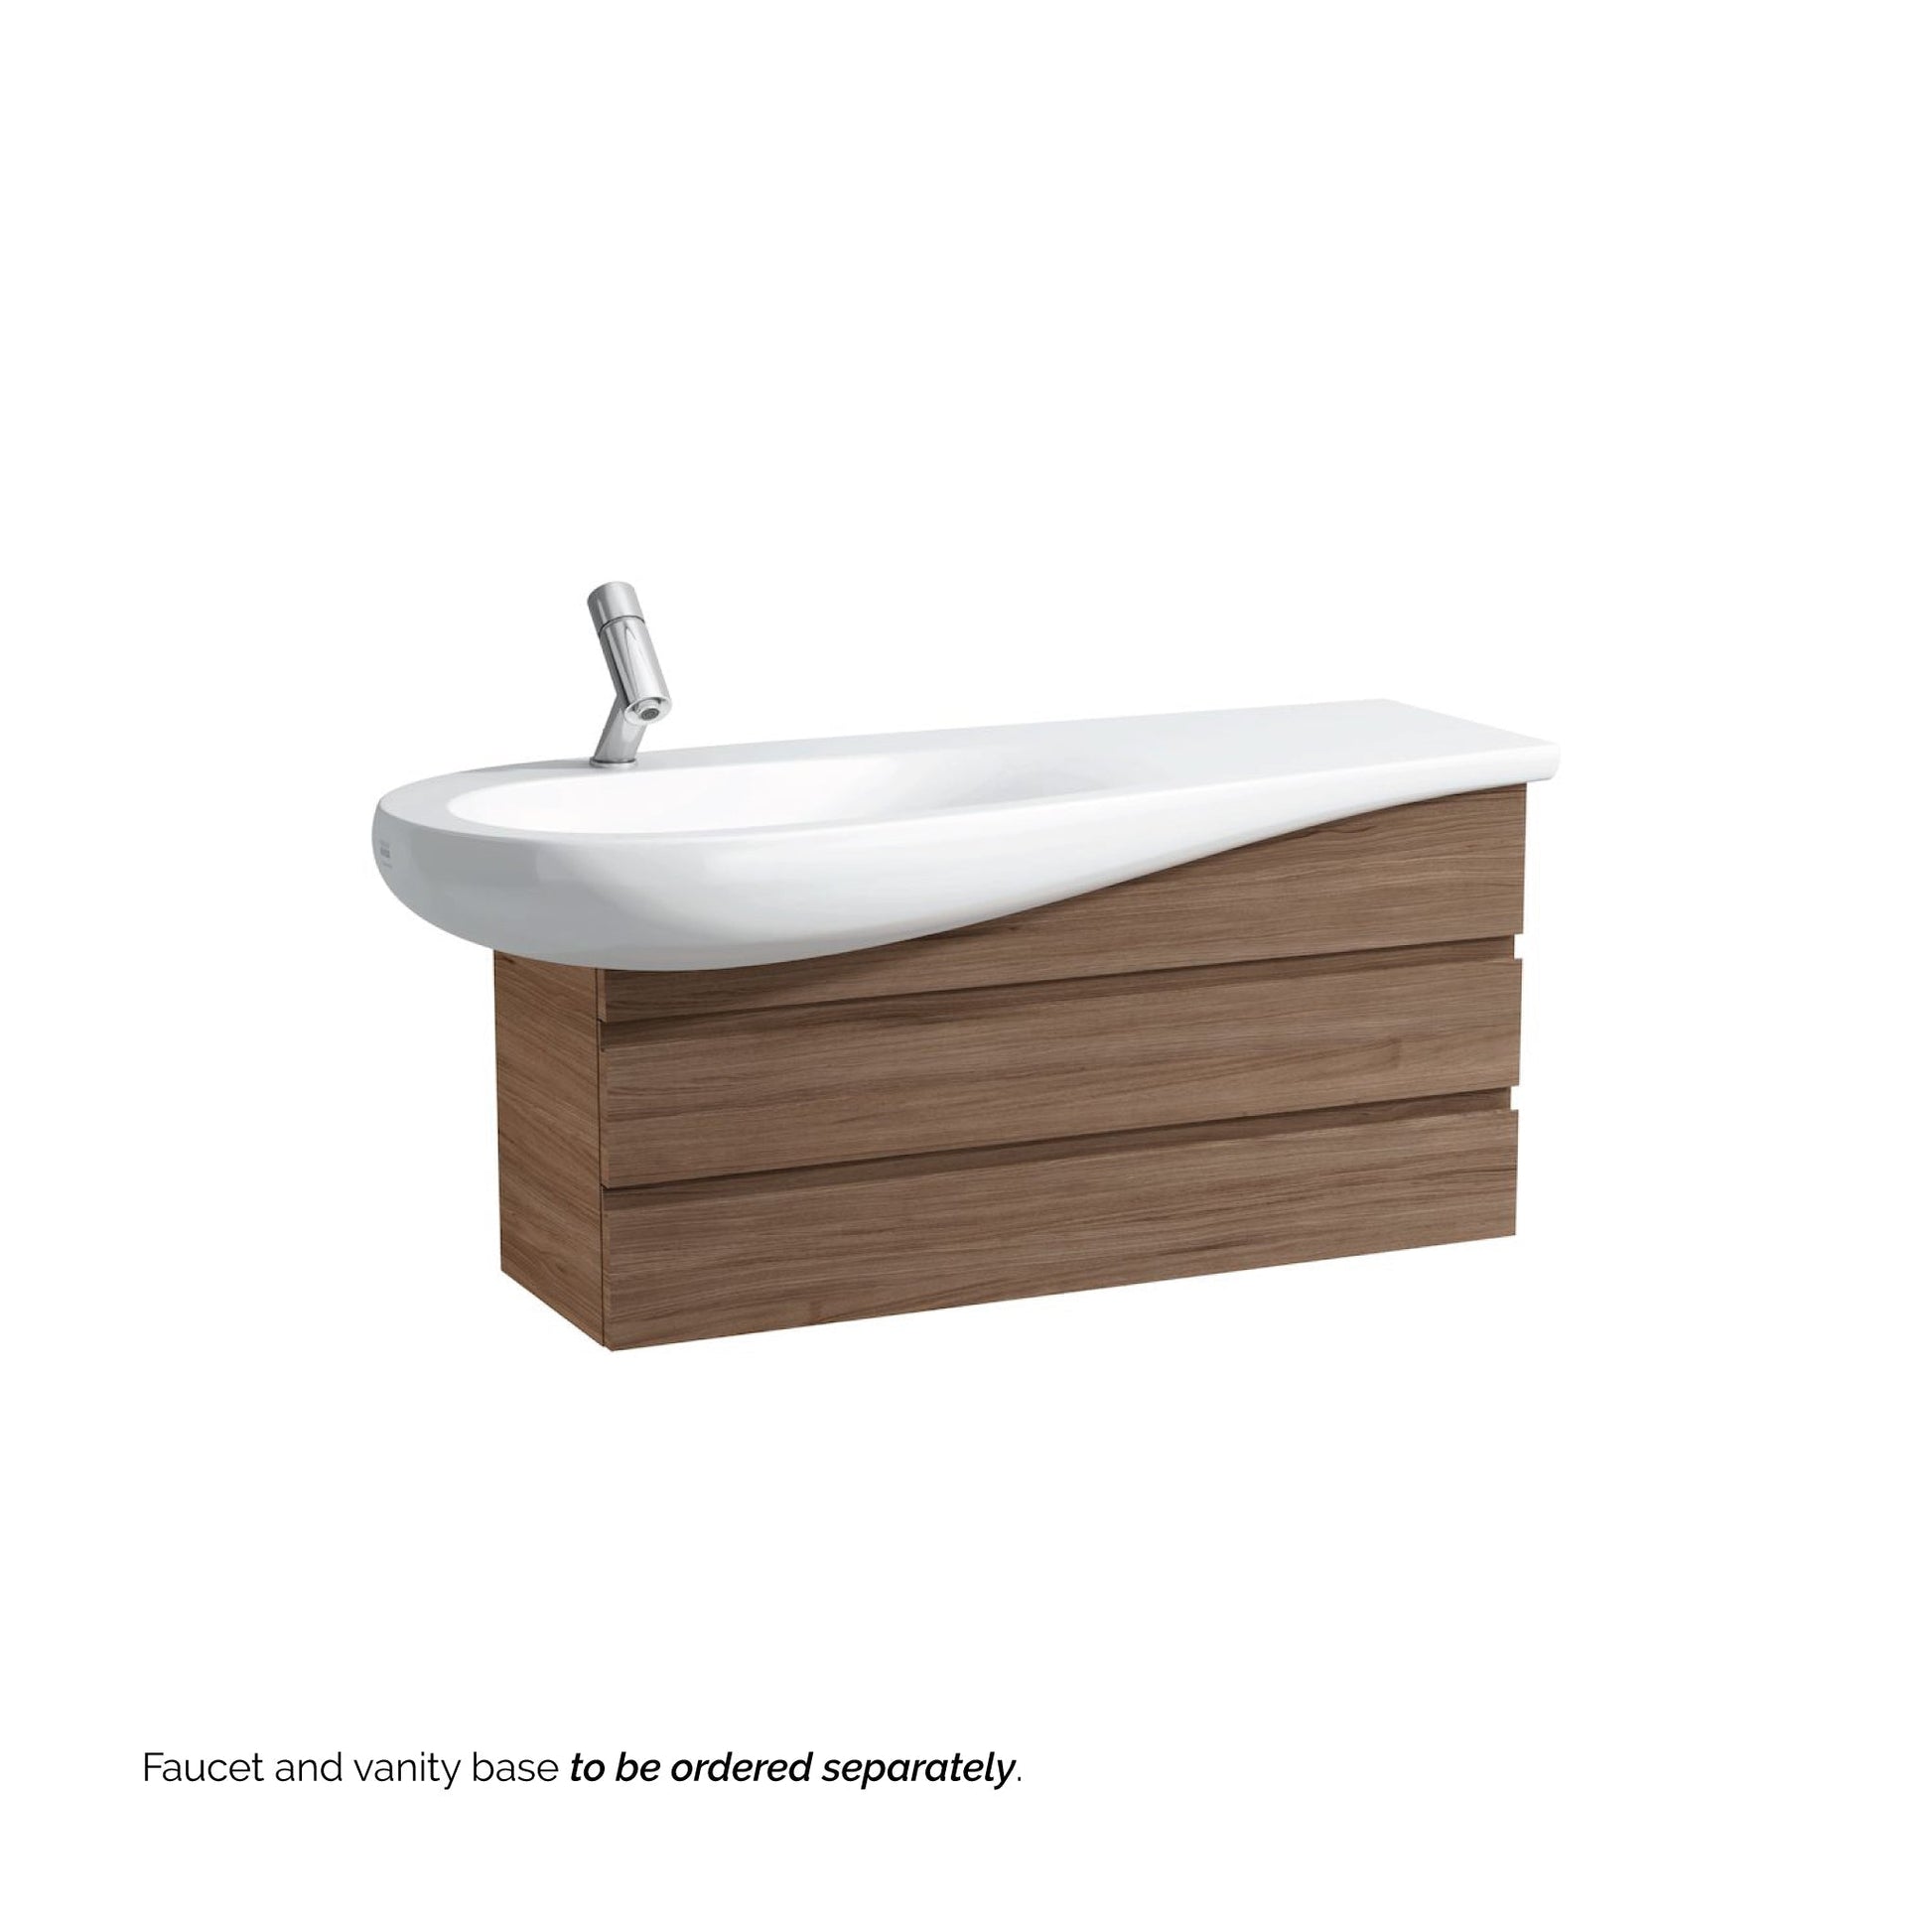 Laufen IlBagnoAlessi 47" x 20" White Wall-Mounted Shelf- Right Bathroom Sink With Faucet Hole